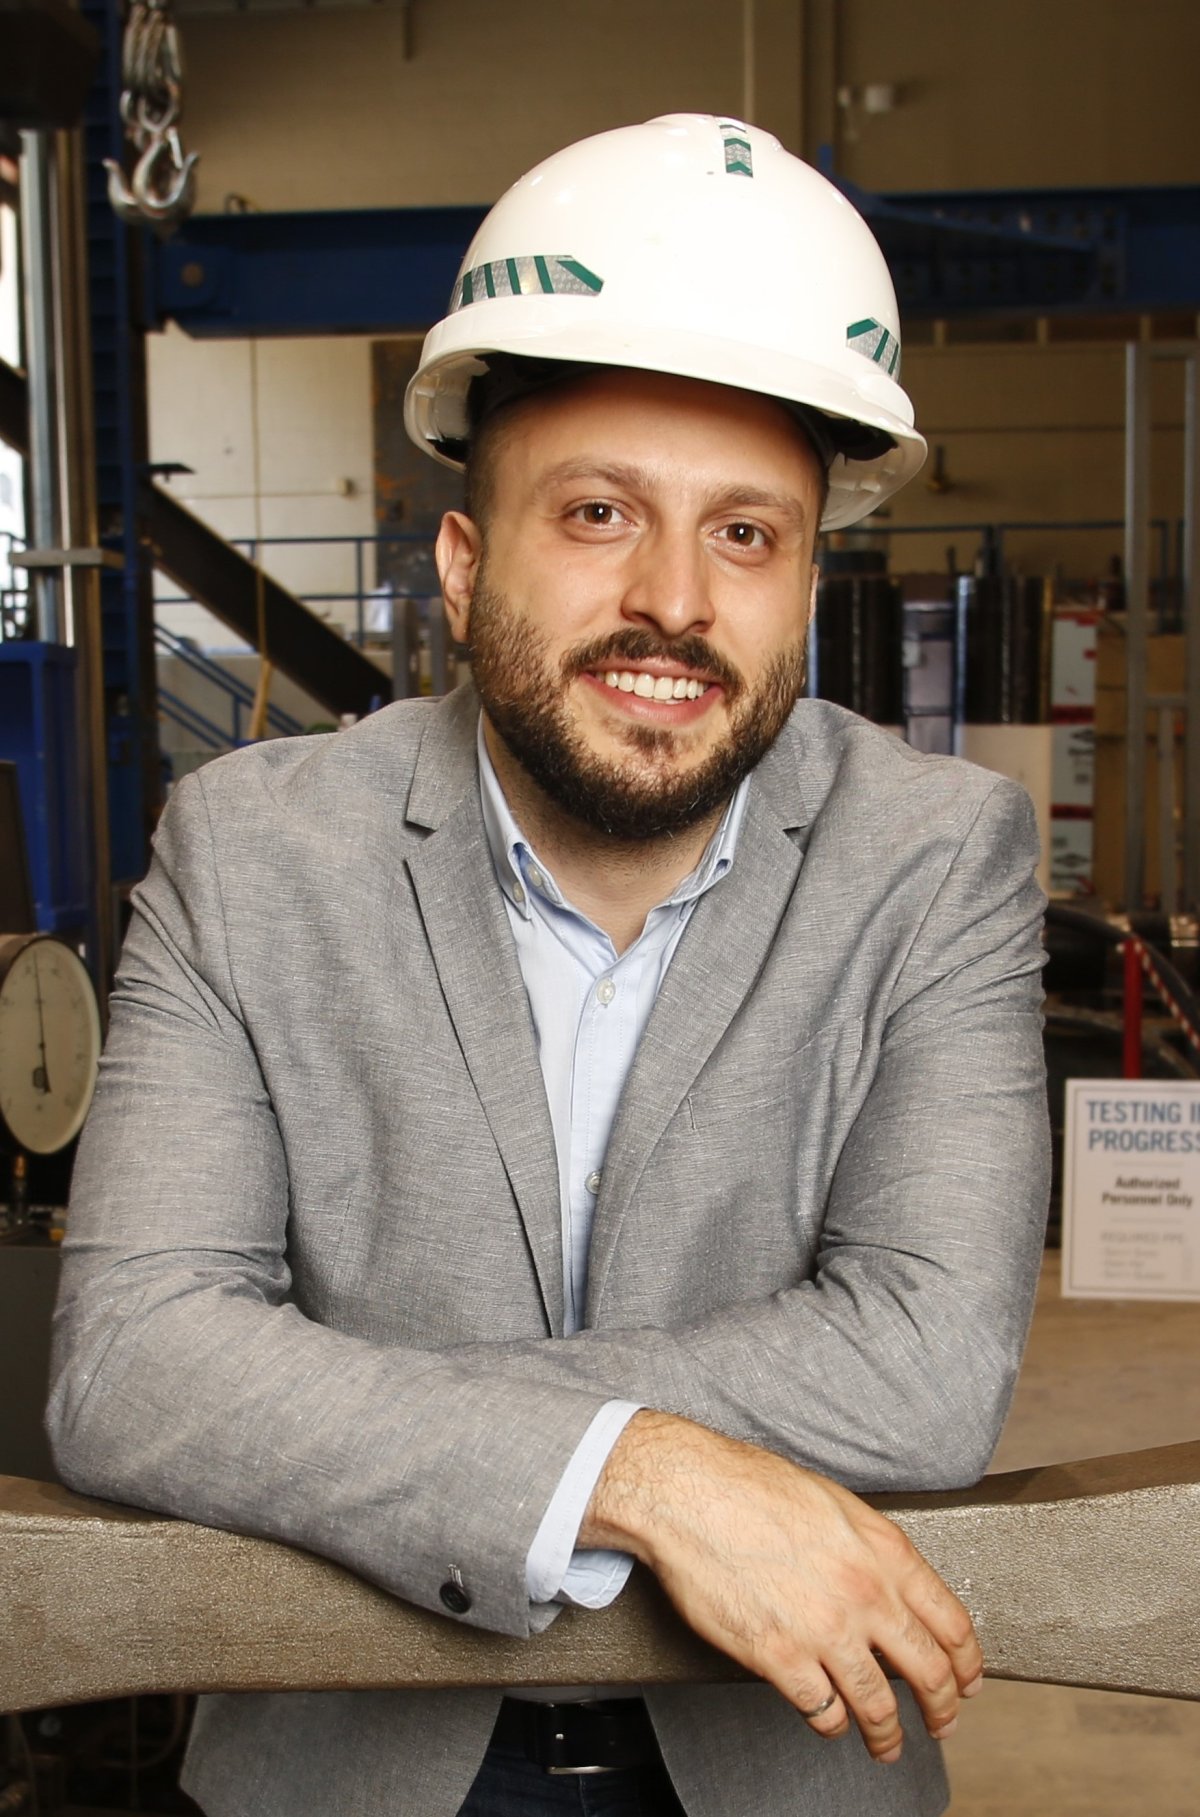 Pedram Mortazavi in a structures lab wearing a white hard hat